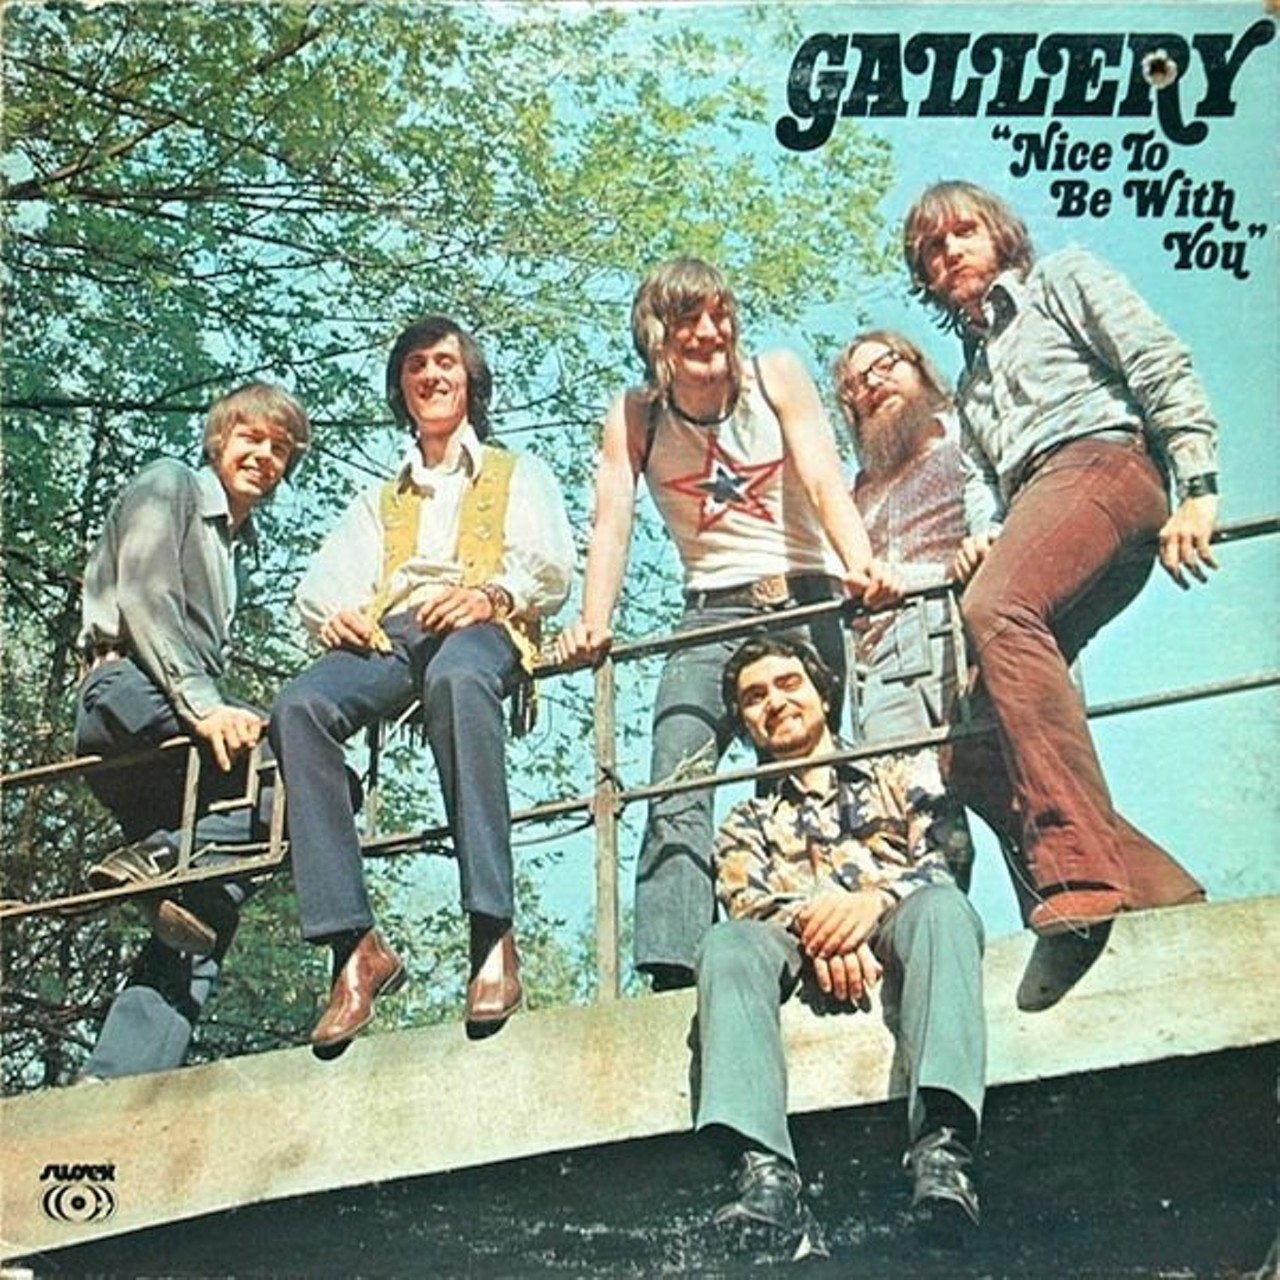 Gallery - &#147;It&#146;s So Nice To Be With You&#148; 
Give this good-time, soft-rock hit a spin and see if it reminds you of anything Detroit. The sunny lyrics, the soulful pedal-steel, the aw-shucks delivery of vocalist Jim Gold all sound like they're inspired by other regions. But it's a purely Detroit disc, with Dennis Coffey on the boards and allegedly all recorded at GM Studios in East Detroit.